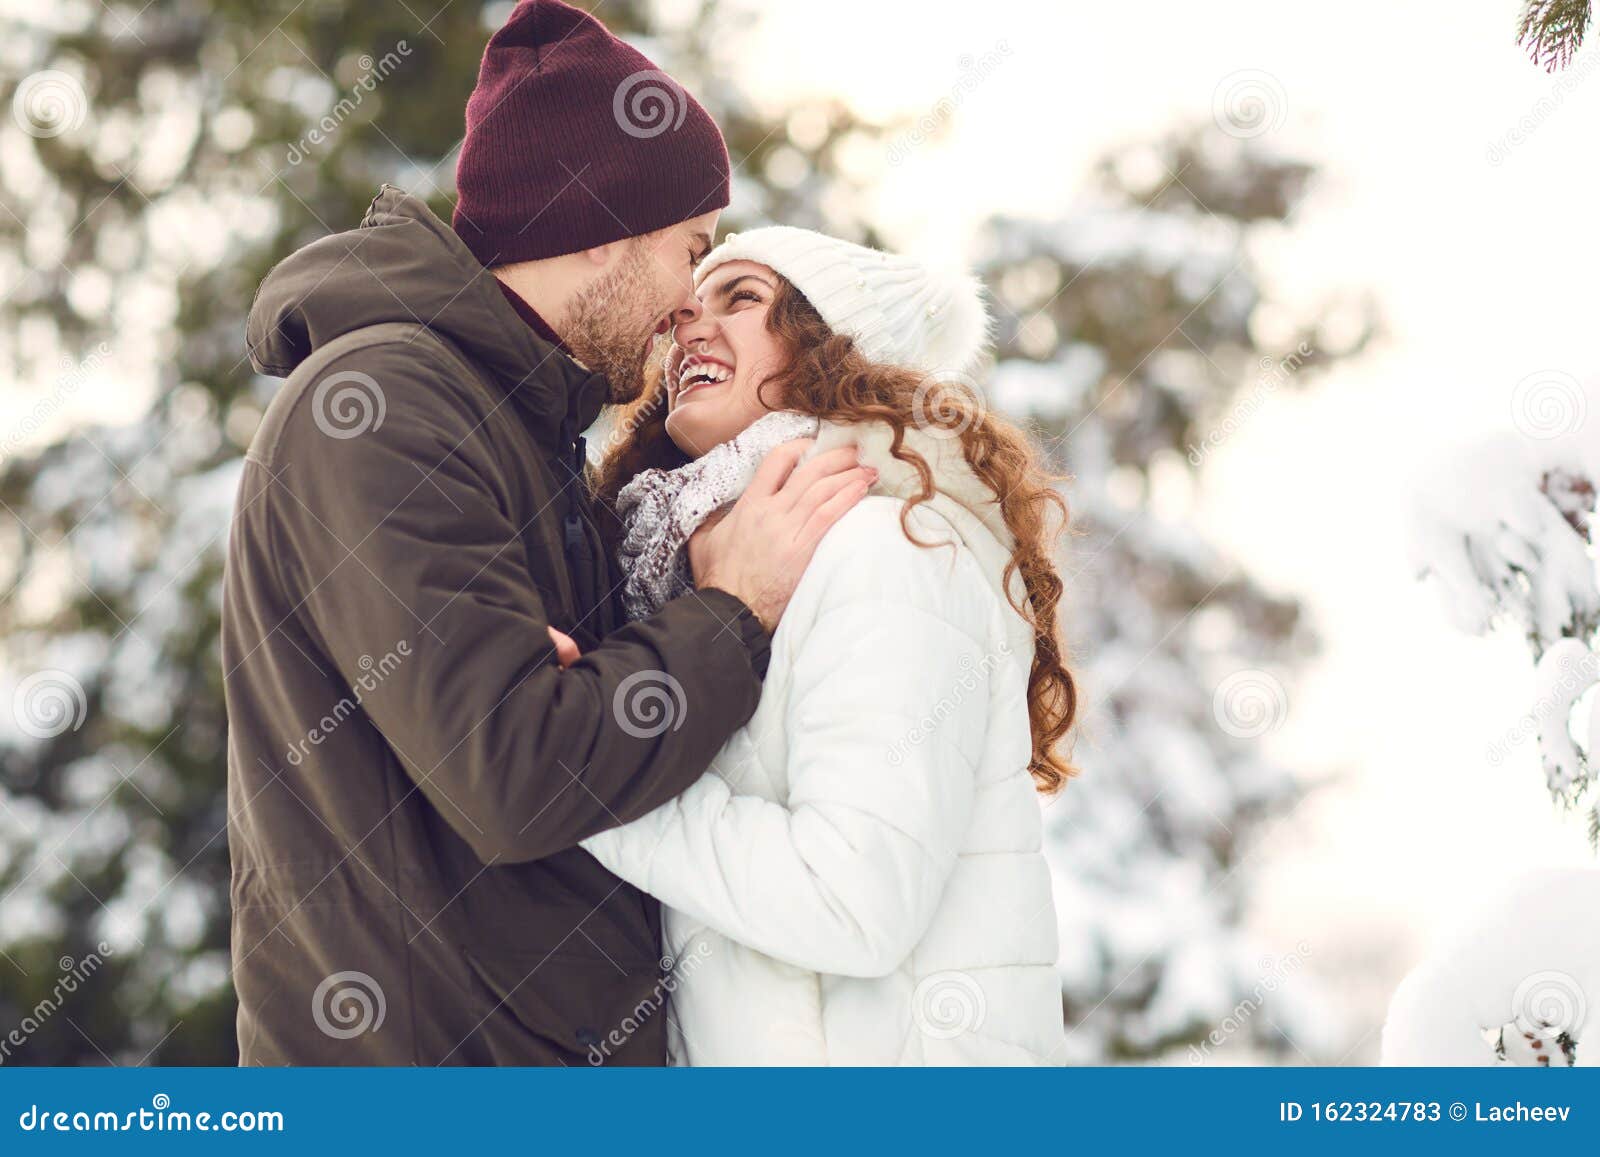 Man And Woman Kissing In Snowy Forest Stock Image Image Of Close Relationship 162324783